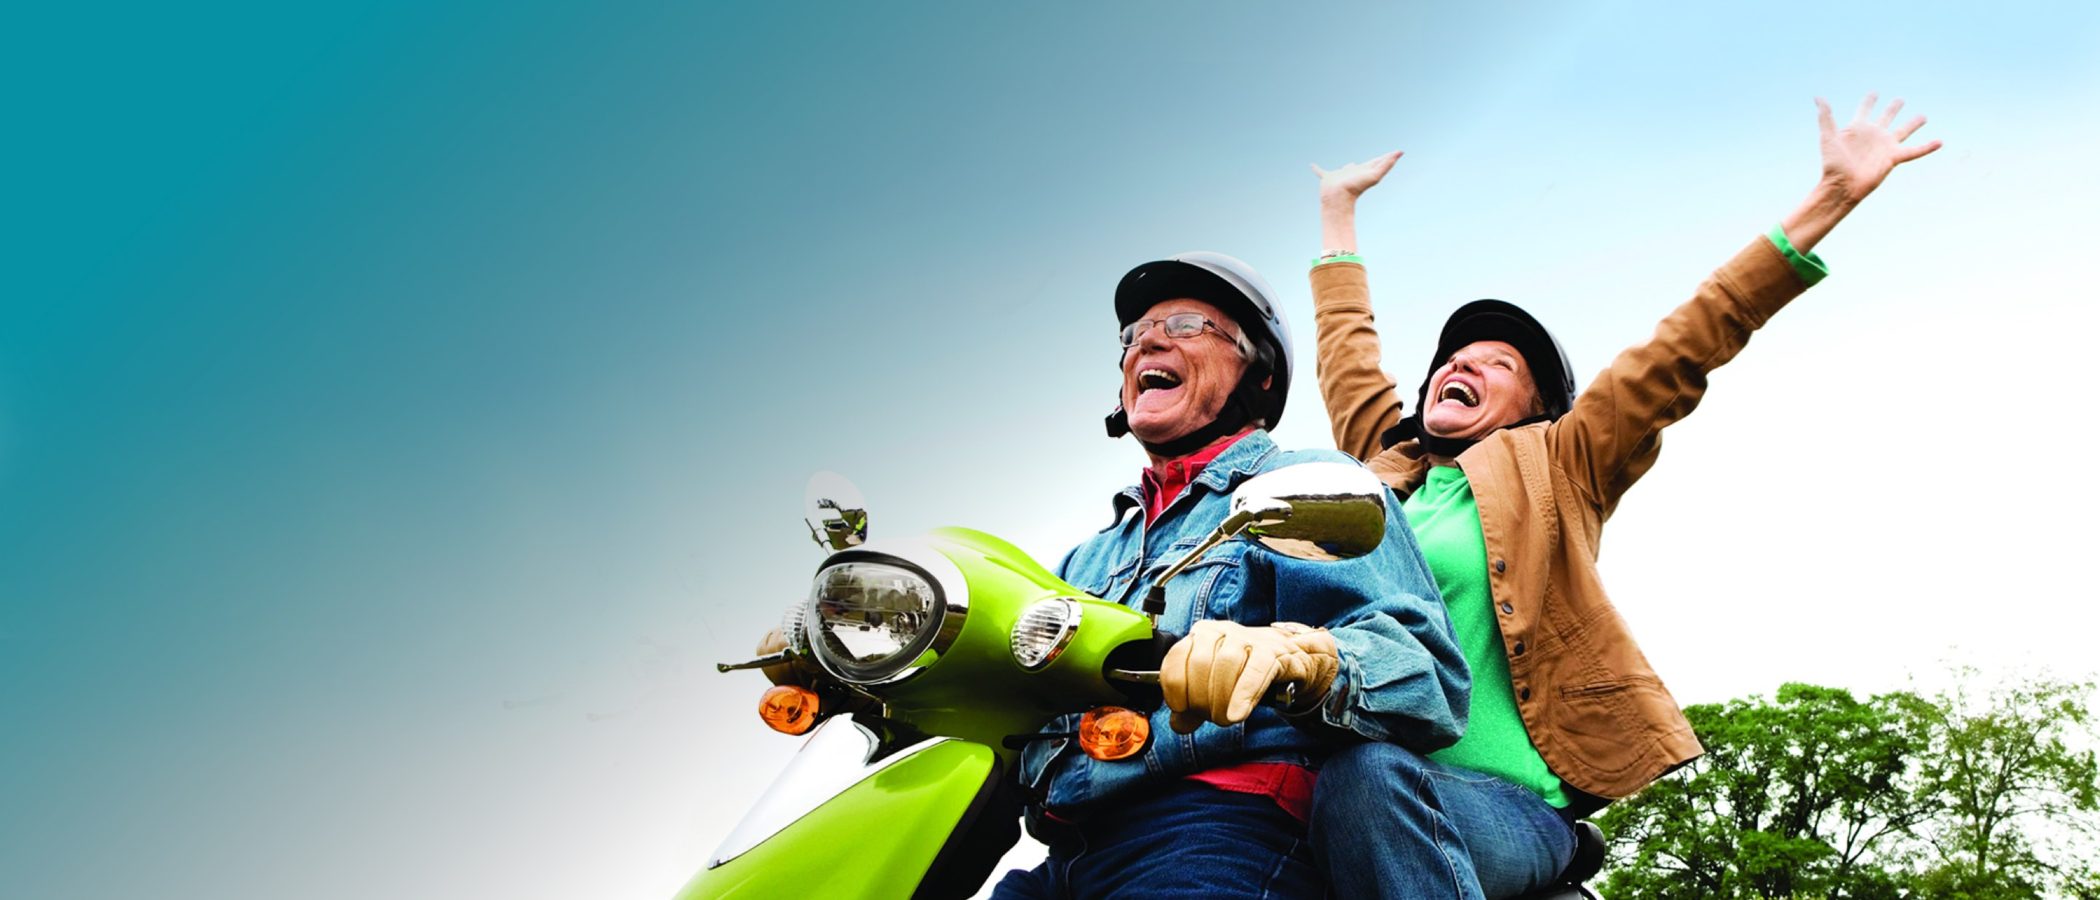 South East Chiropractic: man and woman enjoying retirement riding a motorcycle